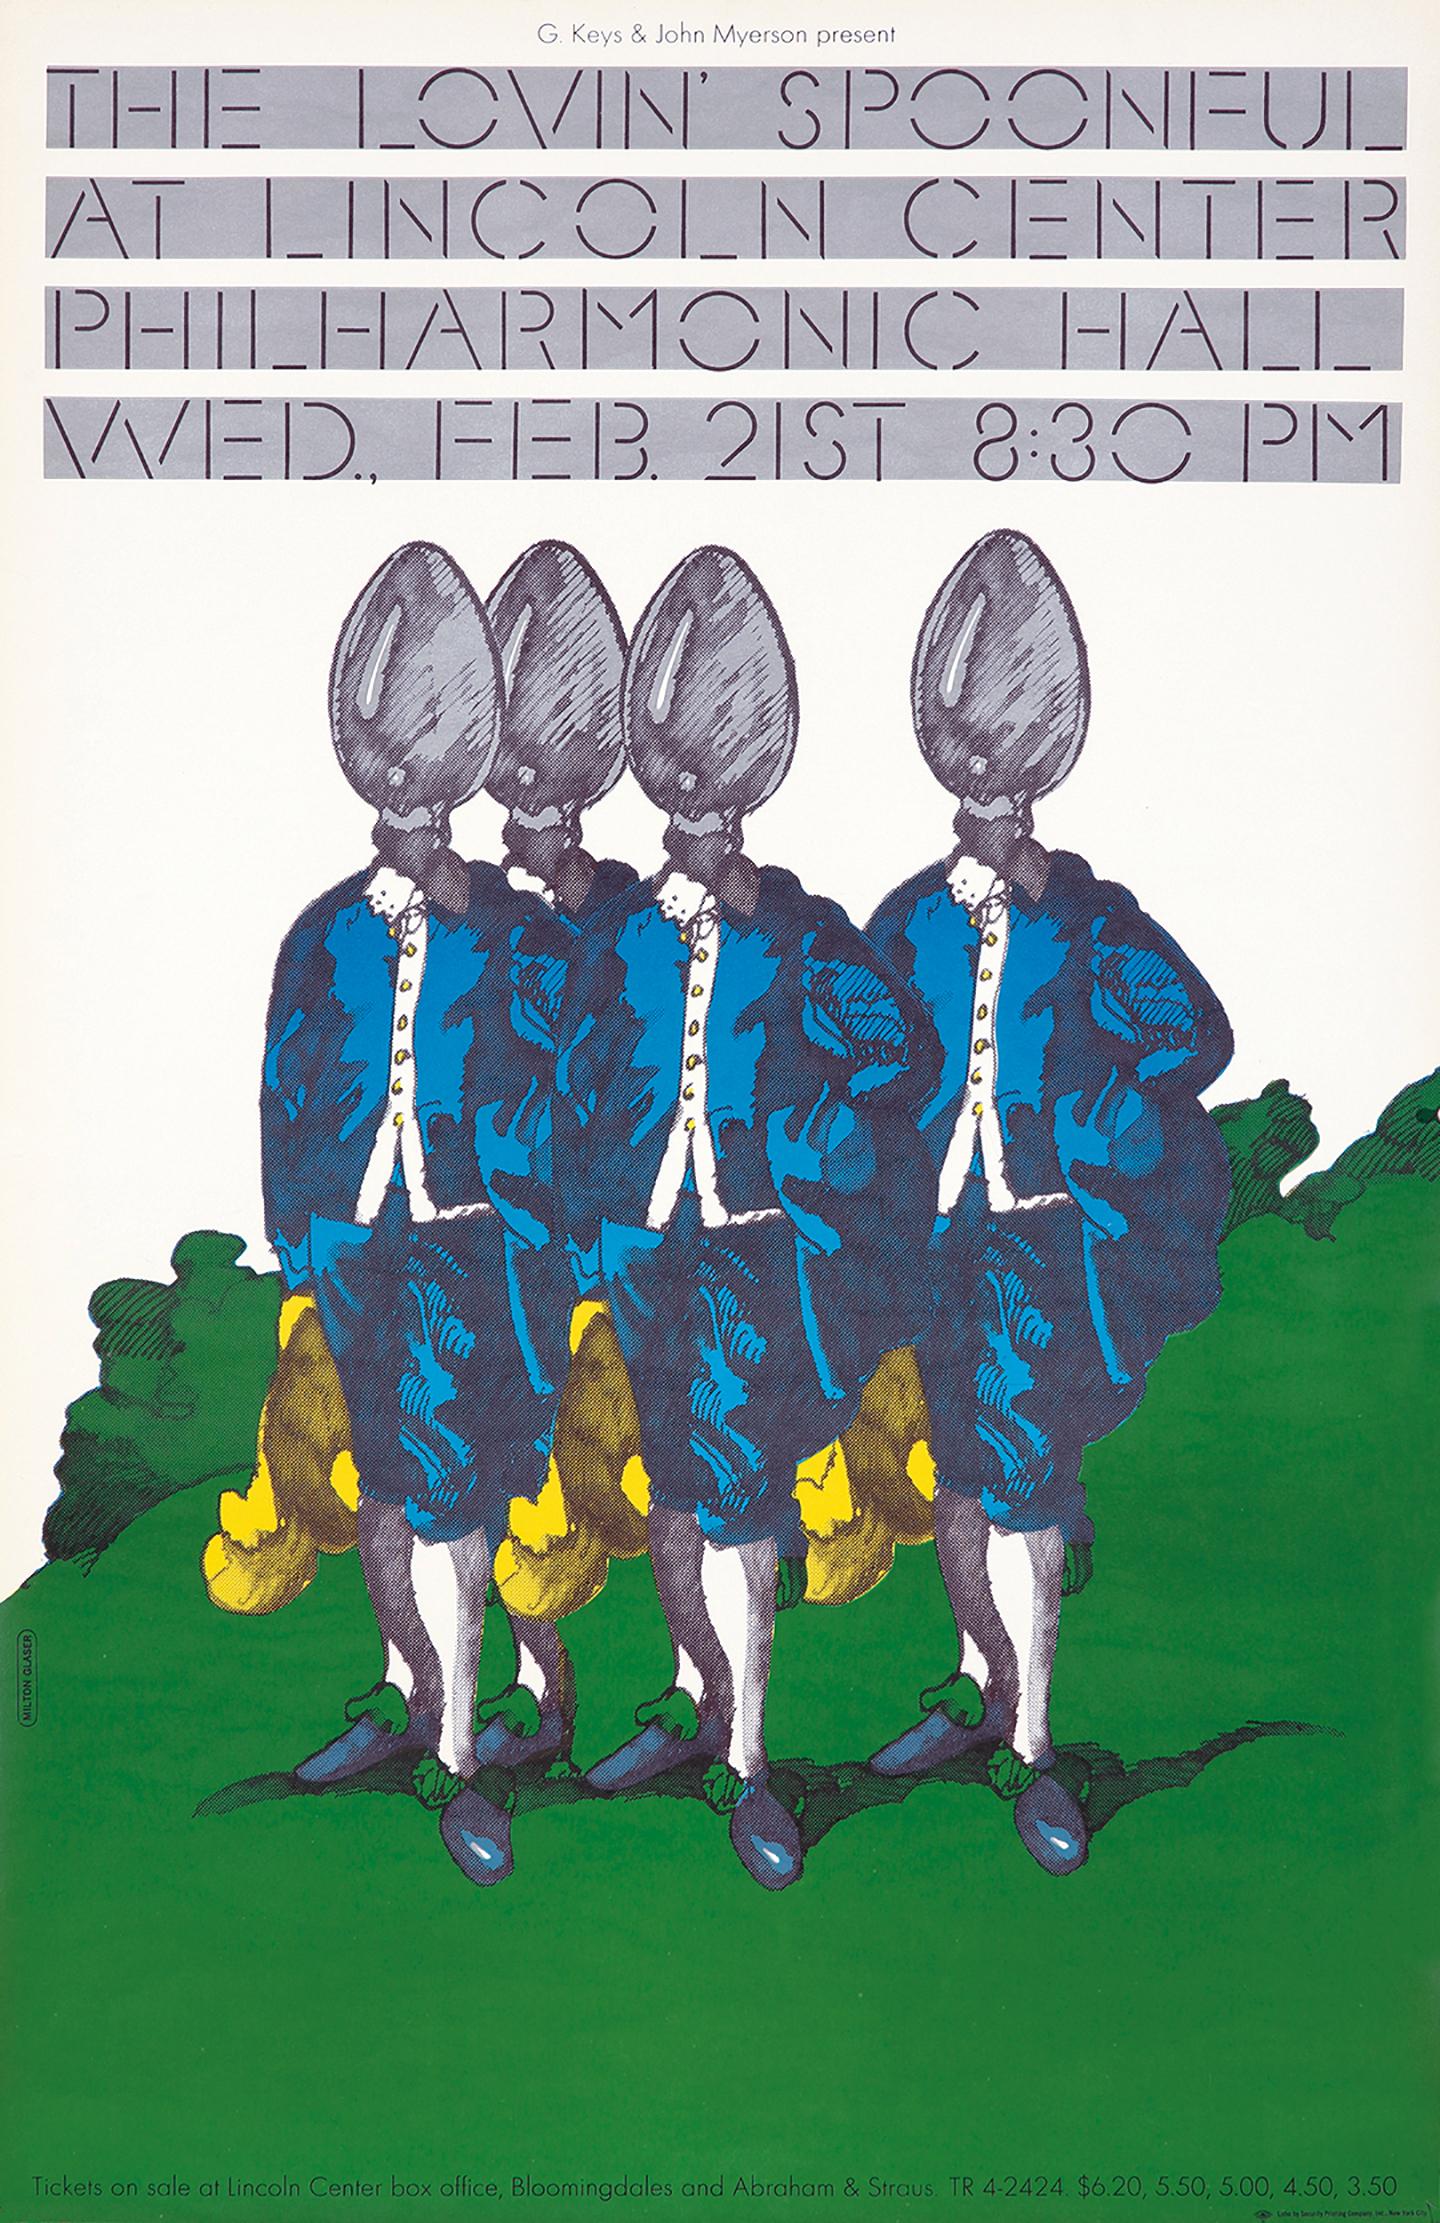 1970s Milton Glaser Poster Art: 
Milton Glaser The Lovin' Spoonful: Vintage original Milton Glaser poster c.1972. Designed by Milton Glaser on the occasion of: "The Lovin' Spoonful at Lincoln Center Philharmonic Hall."

Offset lithograph poster in